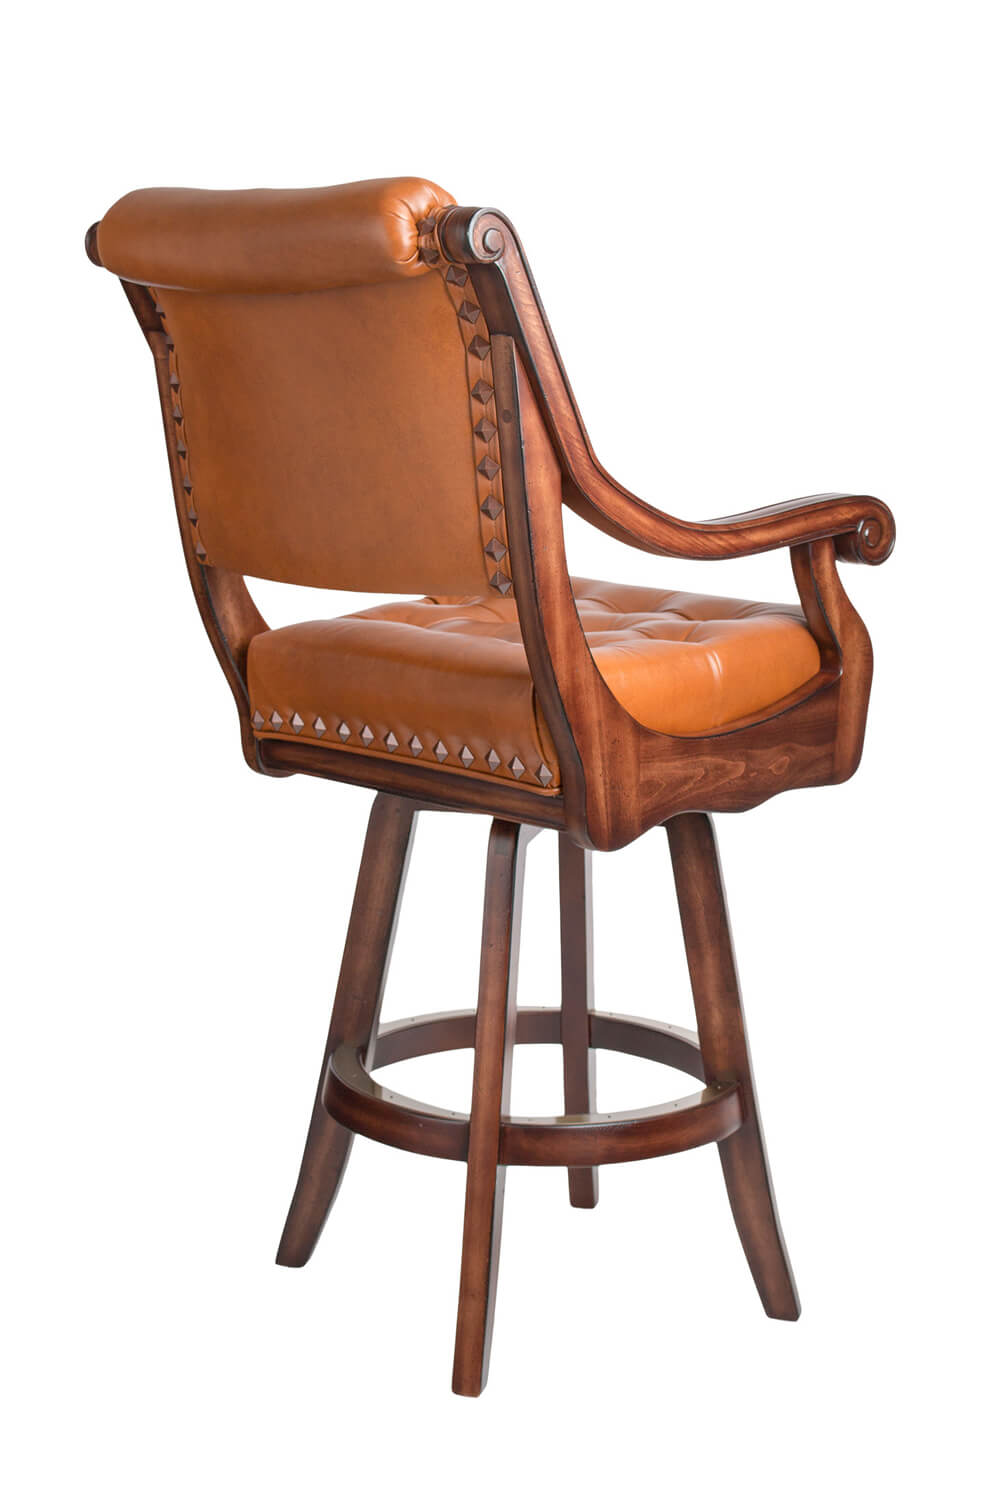 Ponce De Leon Wood Arm Swivel Stool, Leather Swivel Bar Stools With Backs And Arms